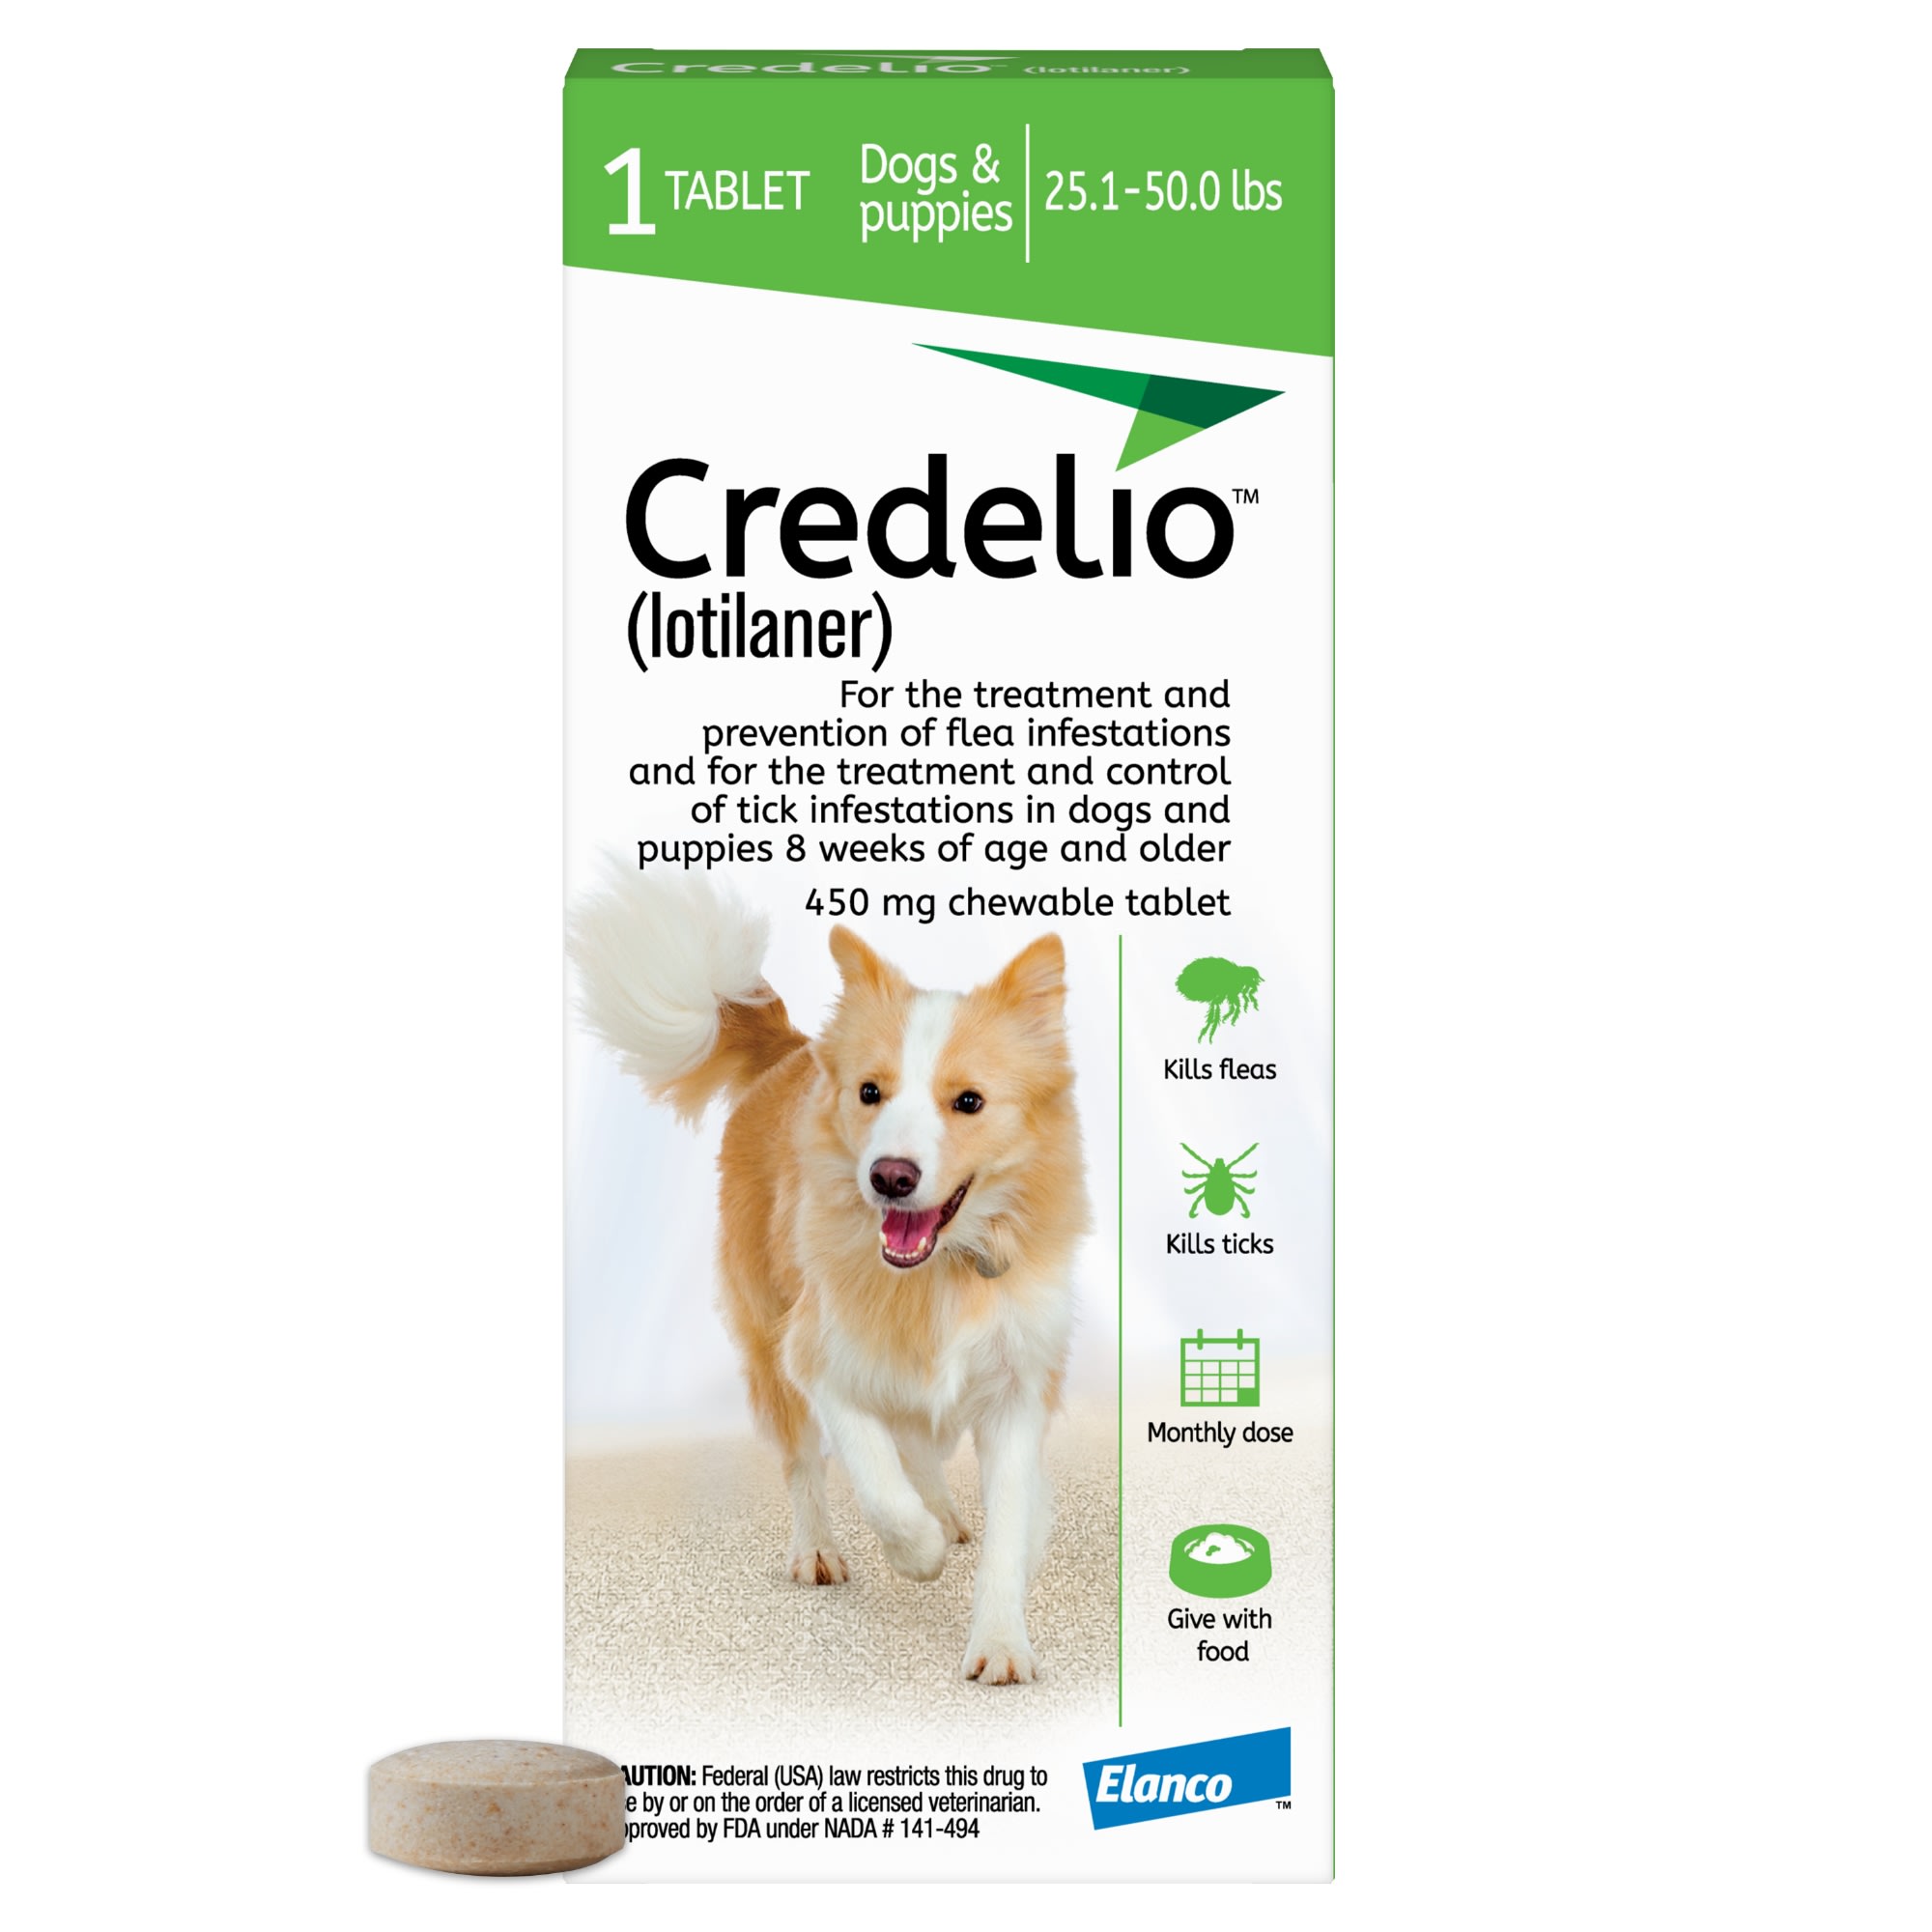 Credelio Chewable Tablet For Dogs 25.1-50 Lbs, 1 Month Supply, Petco